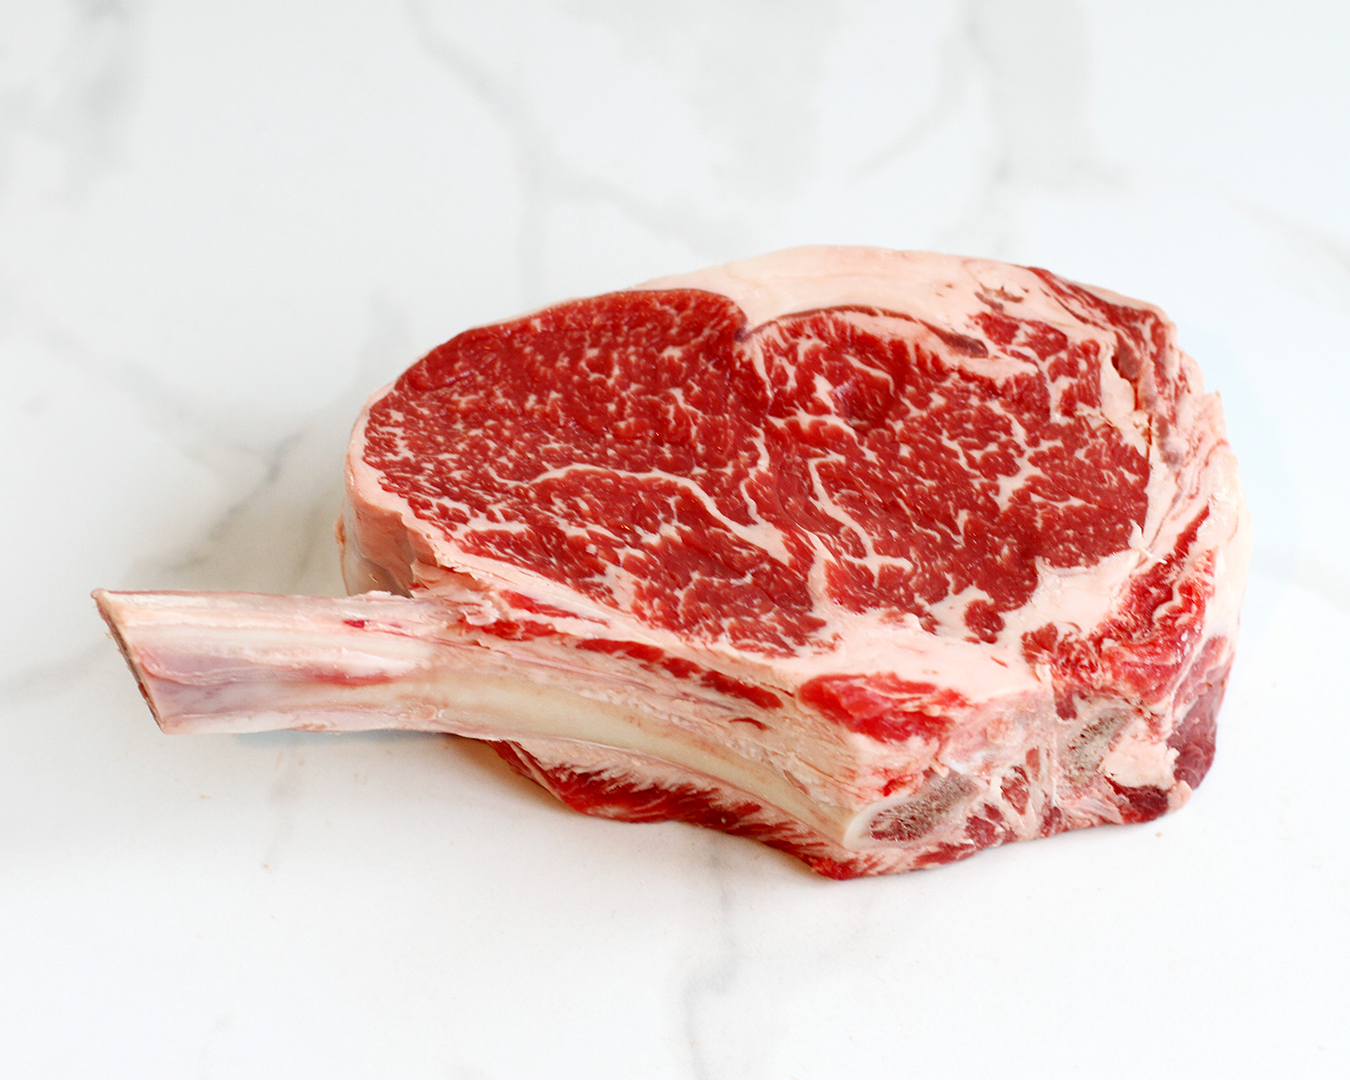 Dry-Aged Beef and Steaks, Dry-Aged Wagyu for Sale